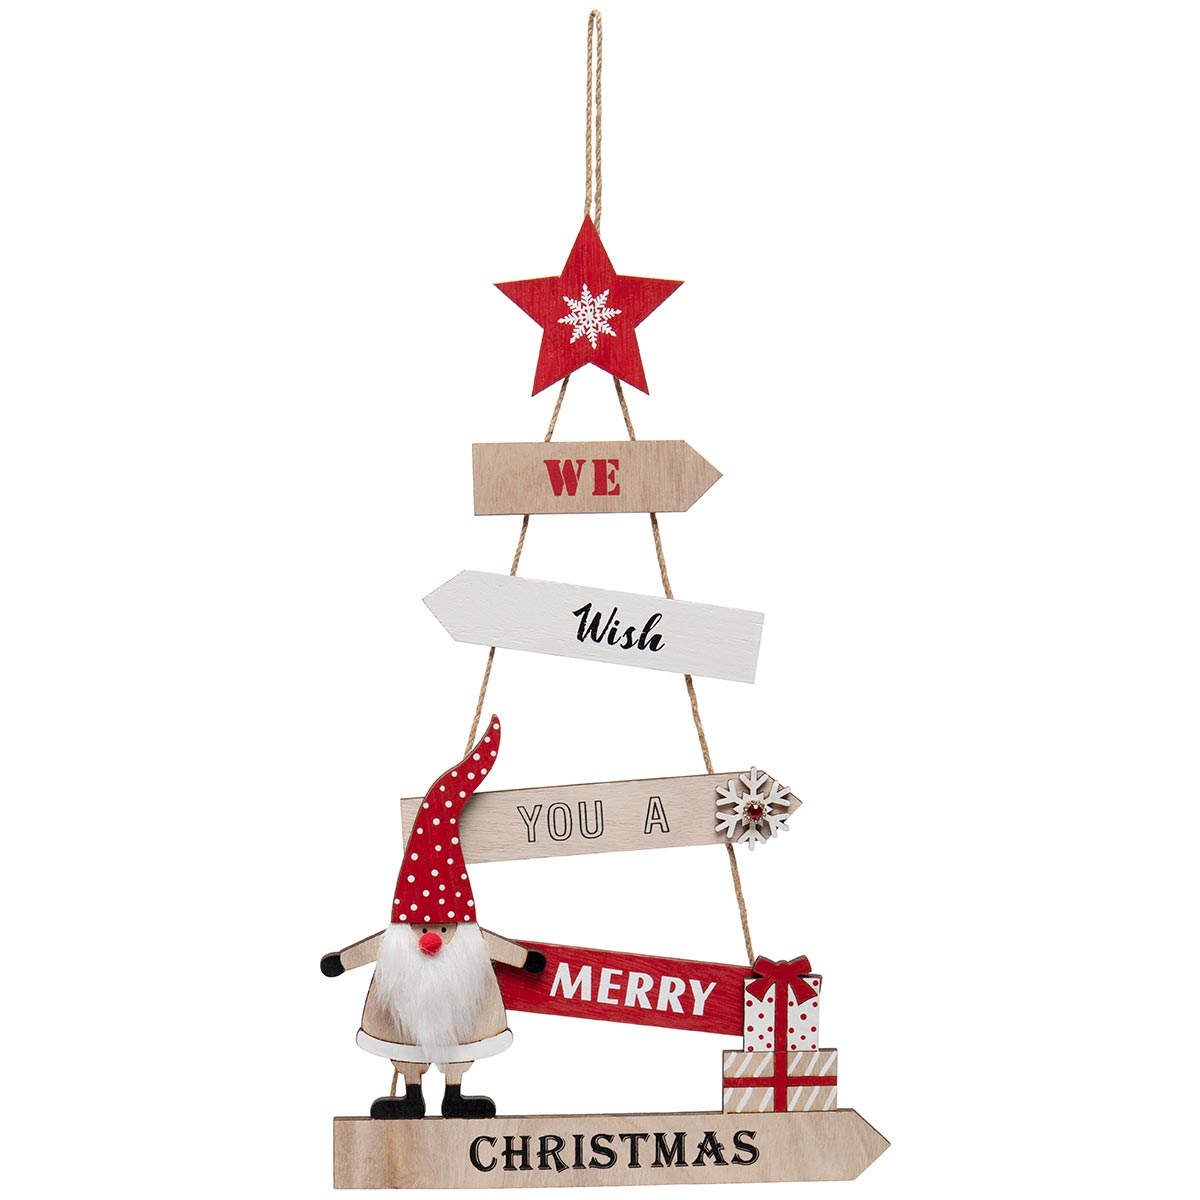 !WE WISH YOU A MERRY CHRISTMAS GNOME WOOD HANGING SIGN f50